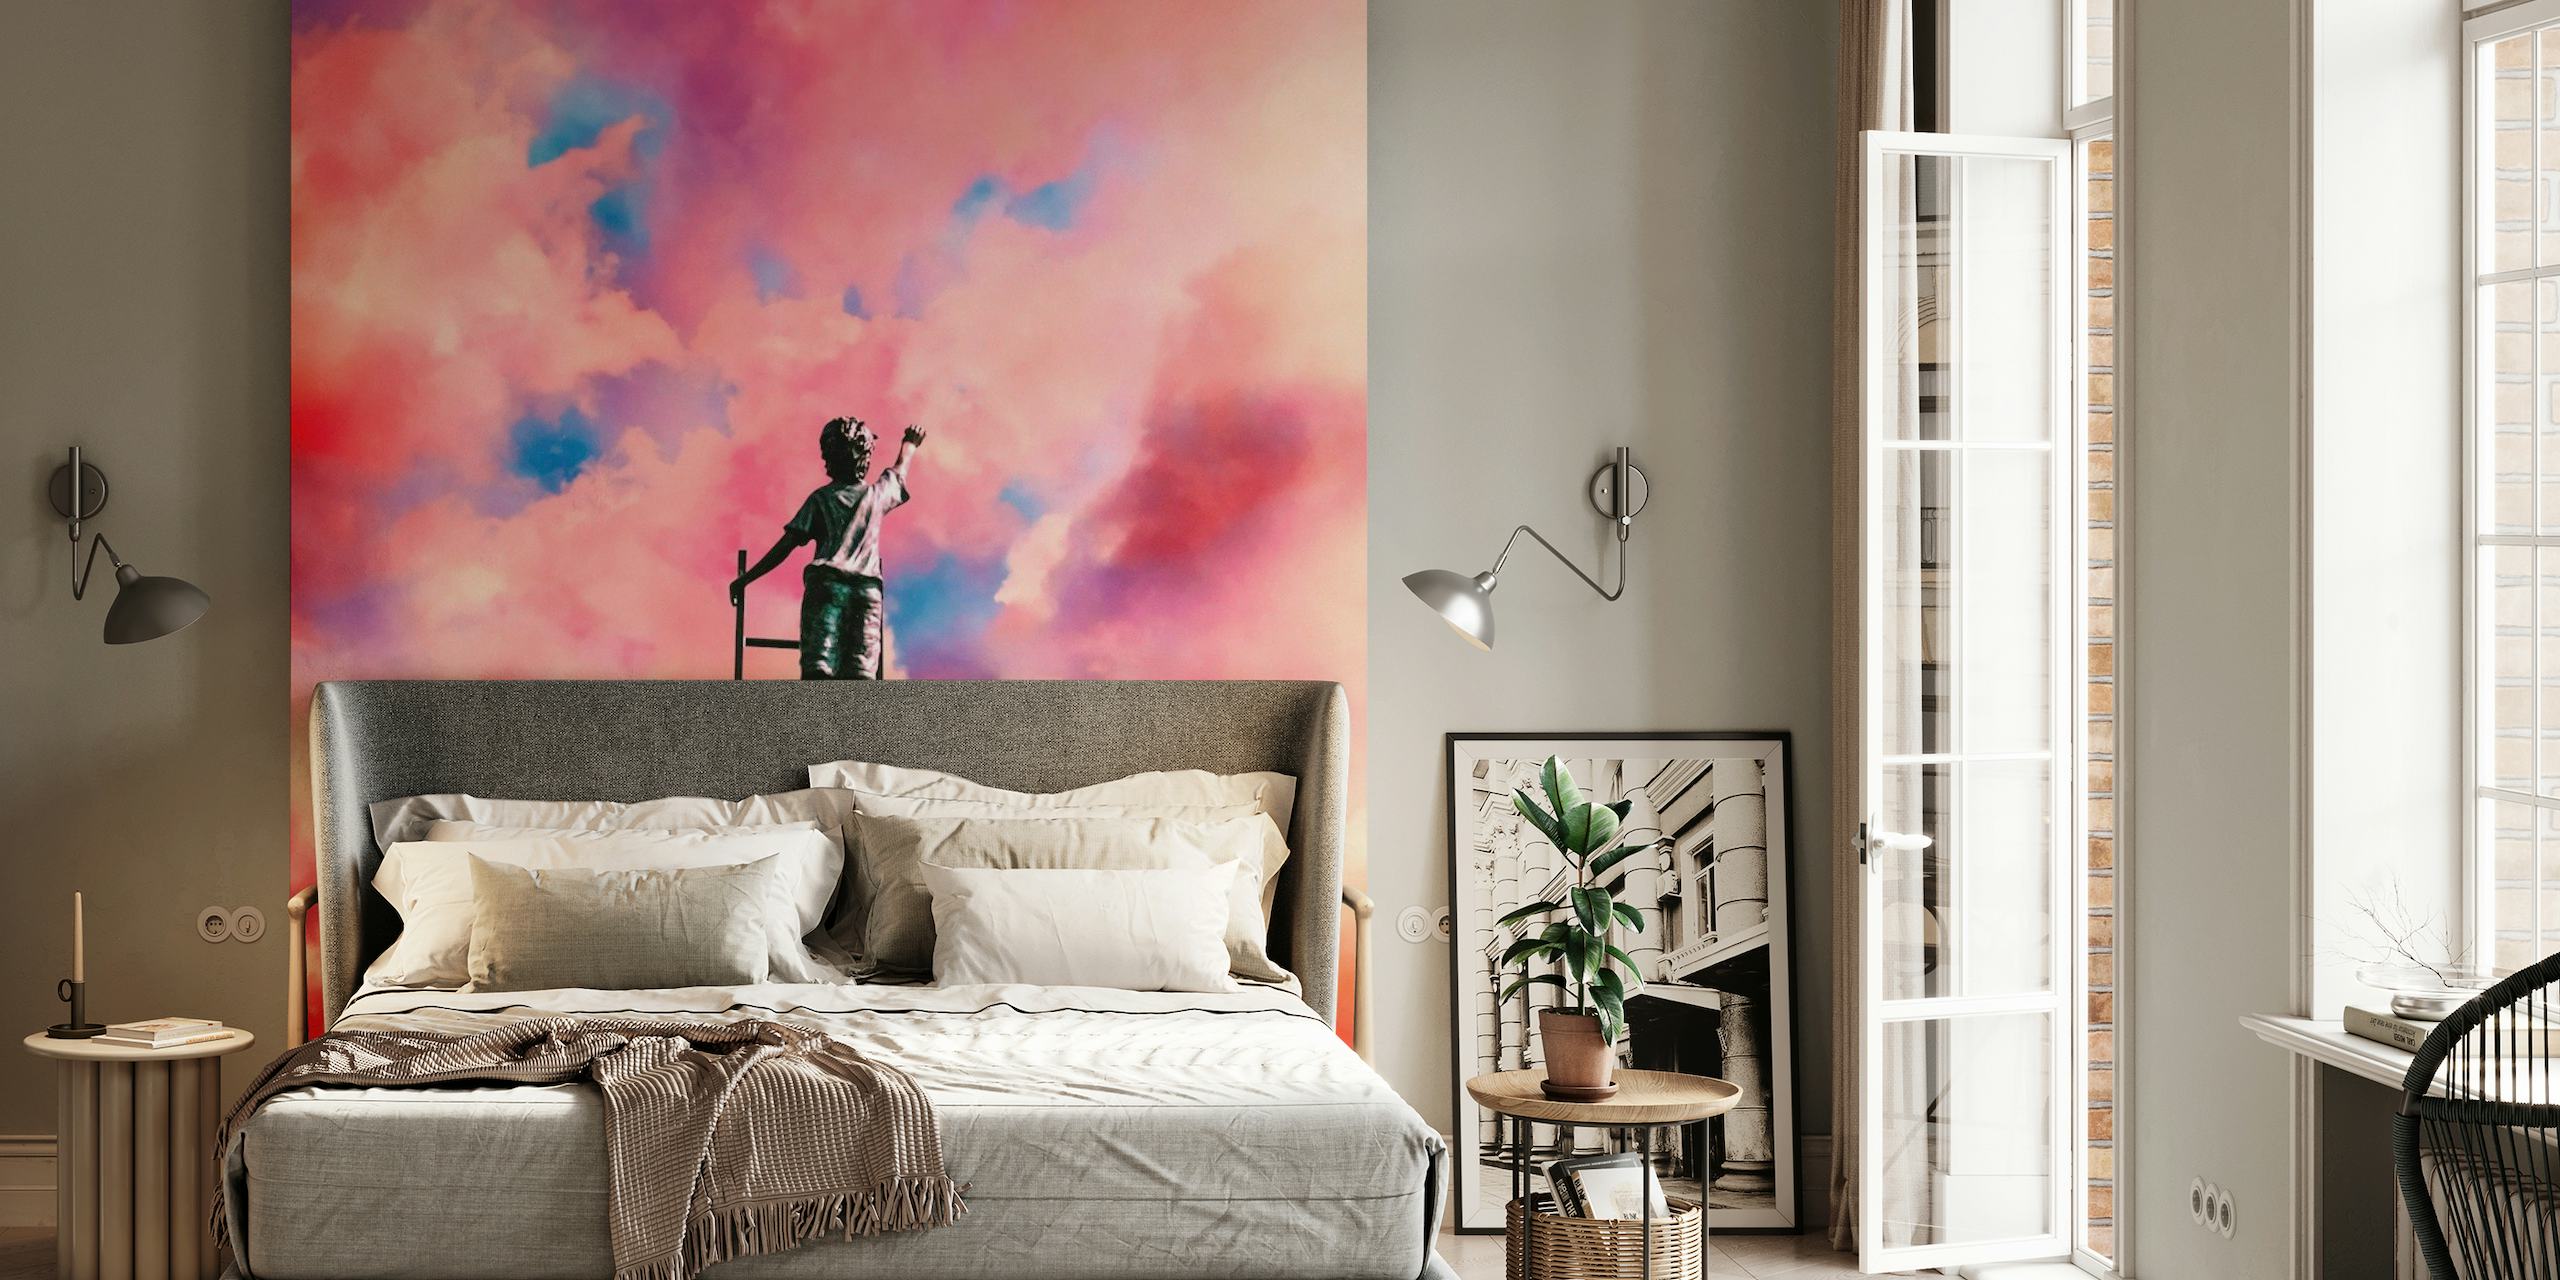 Whimsical wall mural of an artist painting the clouds from a ladder in a vibrant sky